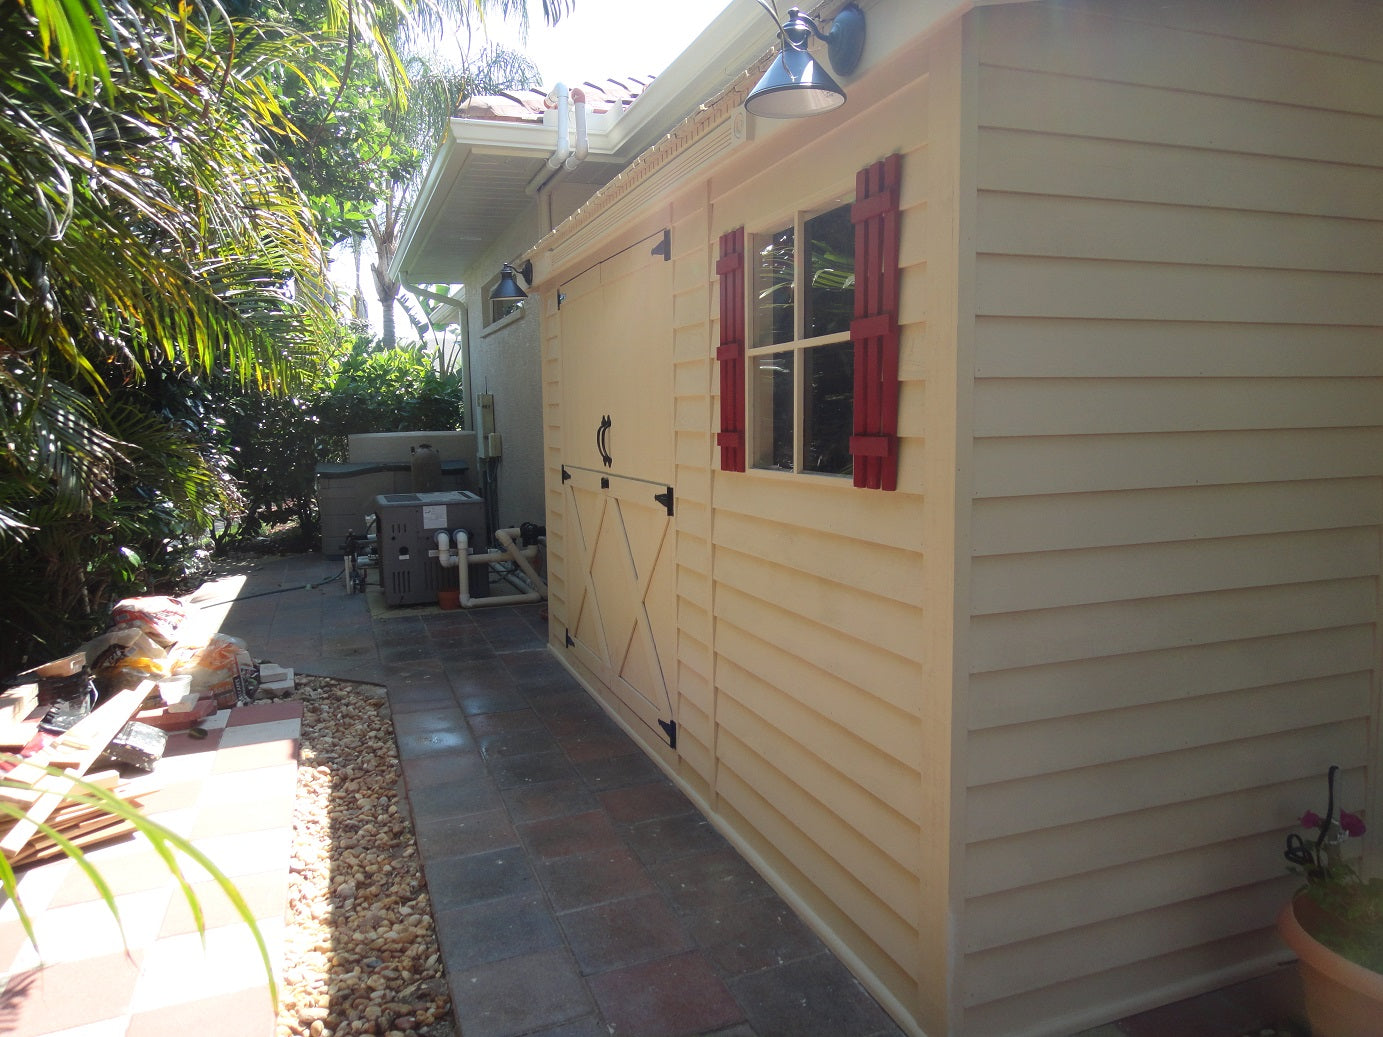 Bayside | Lean To Sheds on Sale